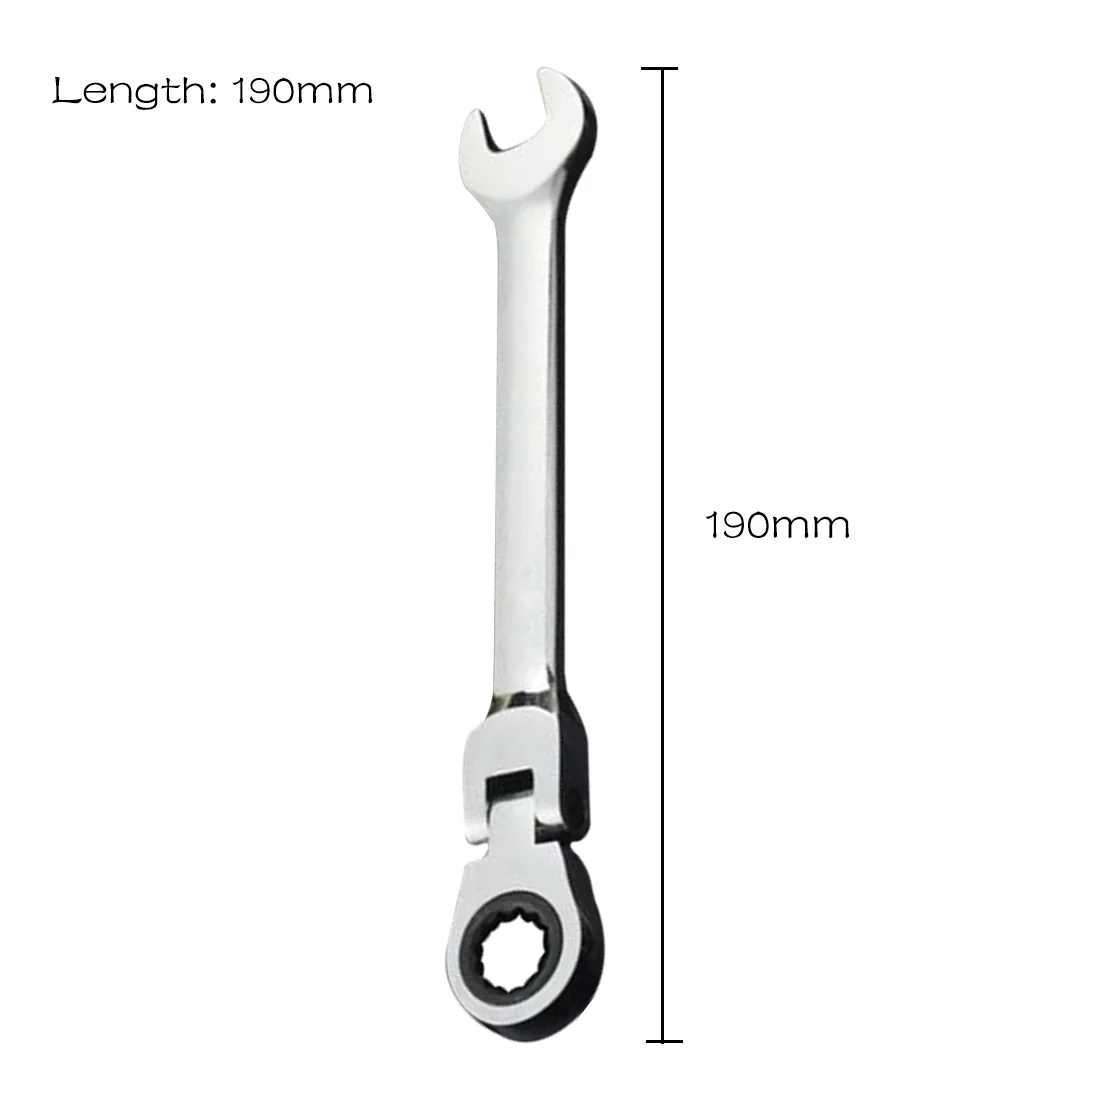 8-19mm Reversible Combination Stubby Ratchet Wrench Ratcheting Socket Spanner Handle Wrenches Hand Tools 72 Gears - Цвет: 15mm 200mm